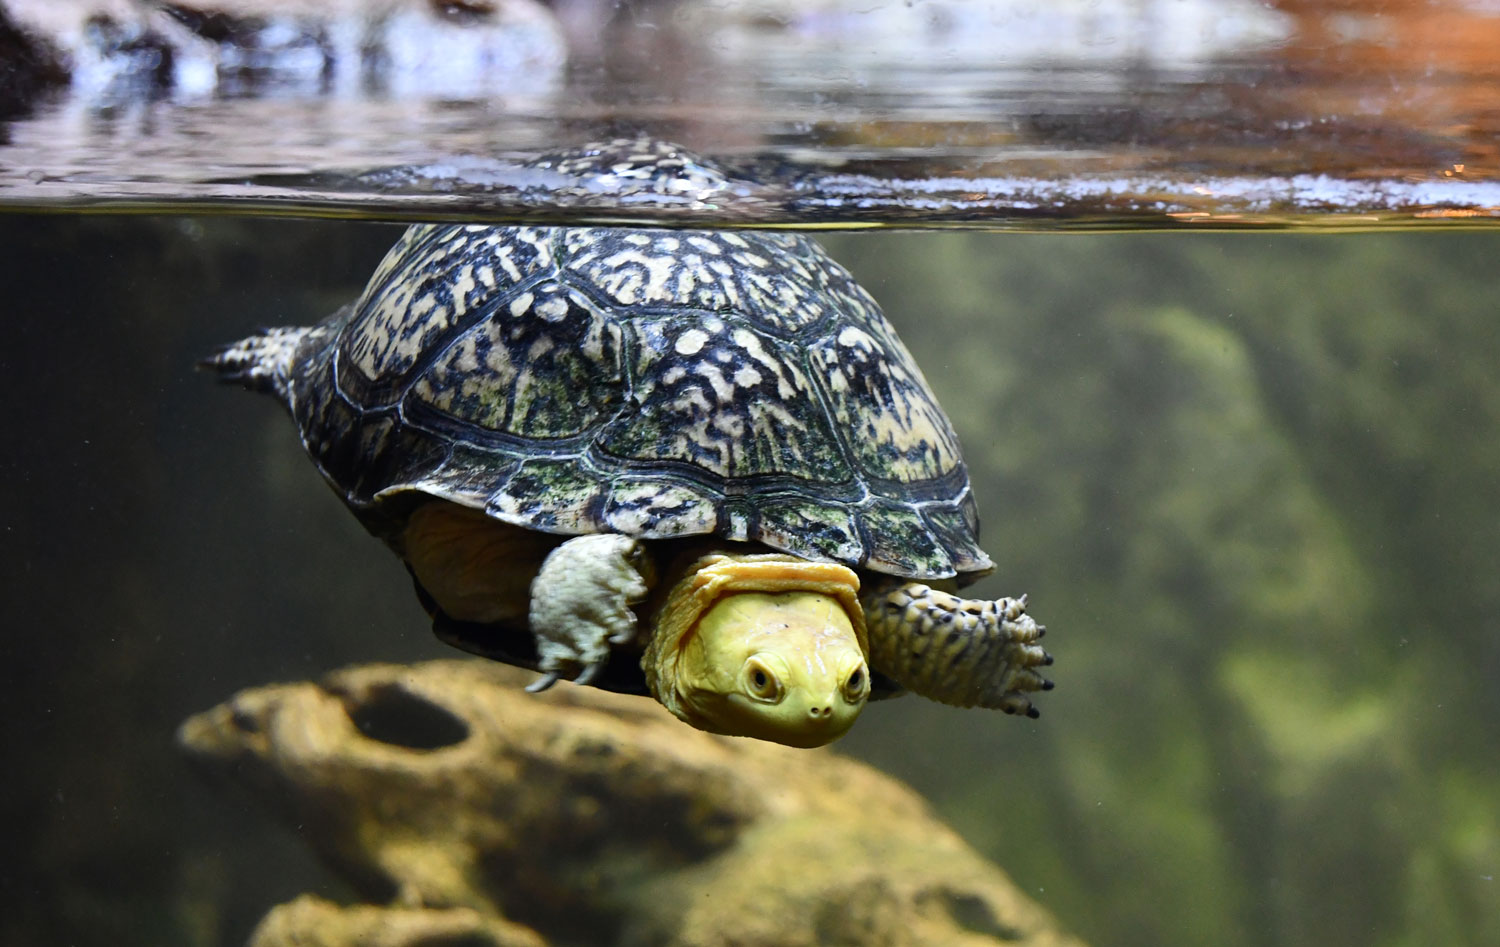 A turtle swimming in water in an aquarium.